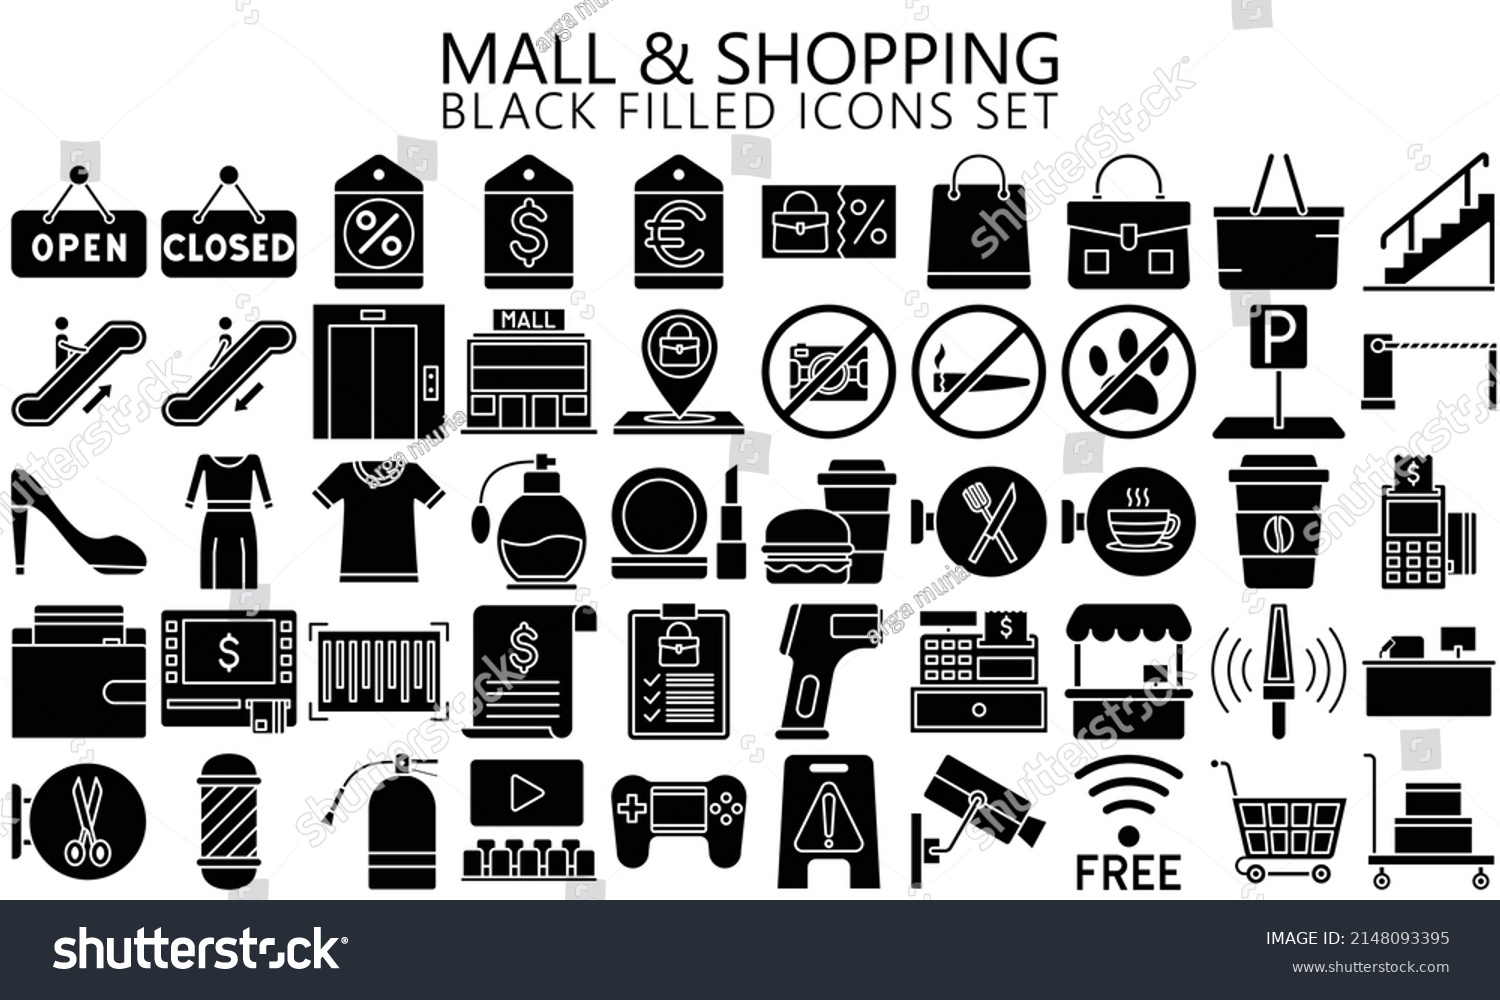 SVG of Market and Shopping mall, retail, black filled icons set with sale offer and payment symbols. Outline icons collection. Used for web, UI, UX kit and applications, vector EPS 10 ready convert to SVG svg